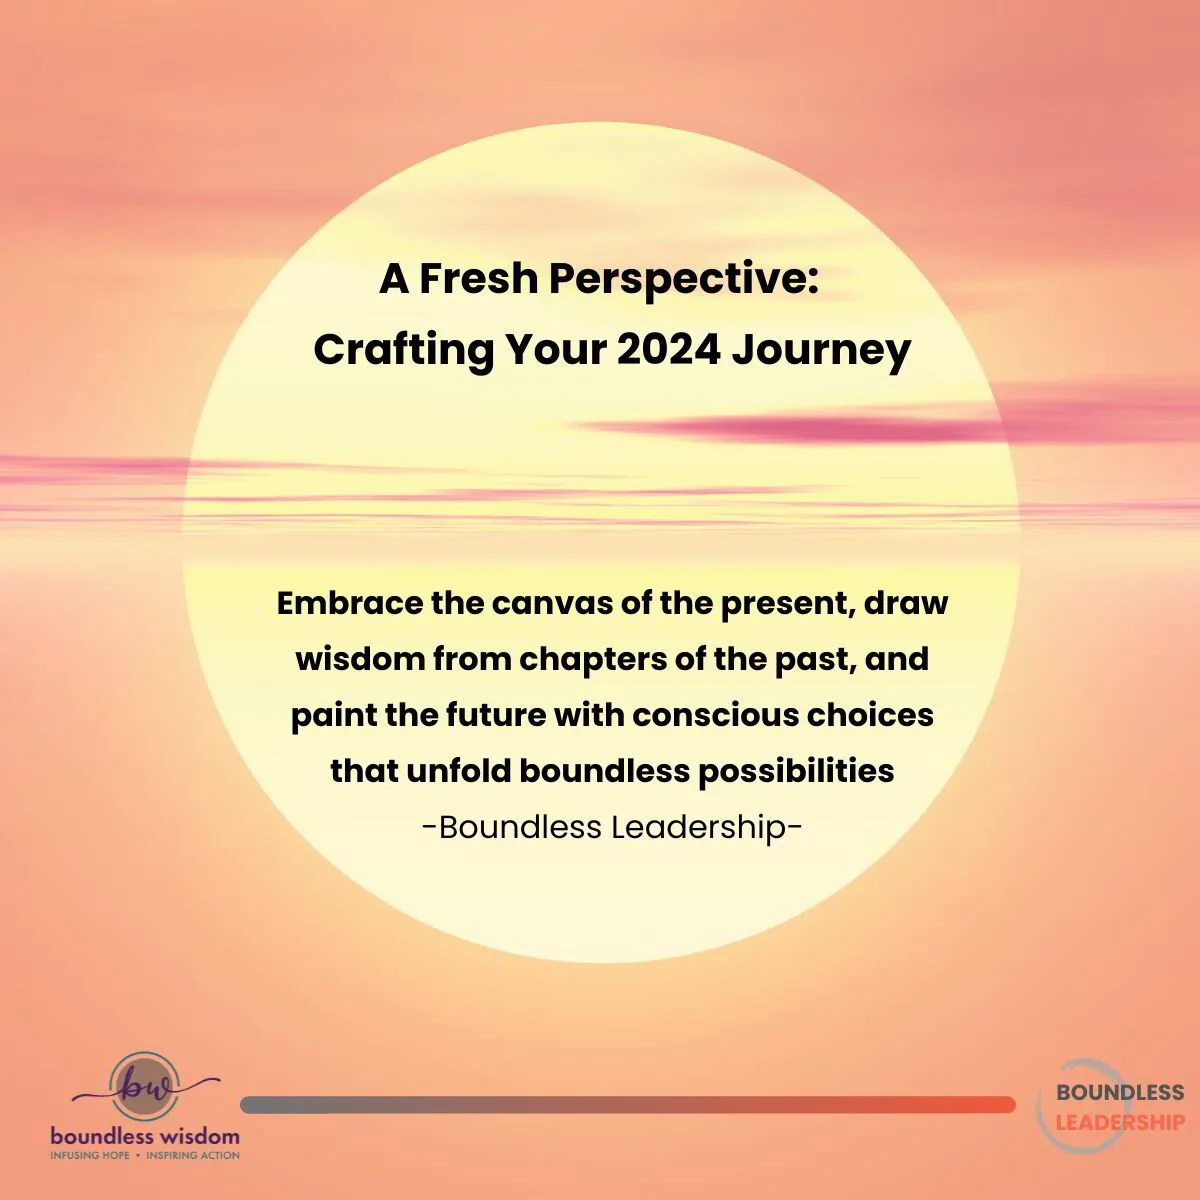 A Fresh Perspective Crafting Your 2024 Journey 4018238 ?format=webp